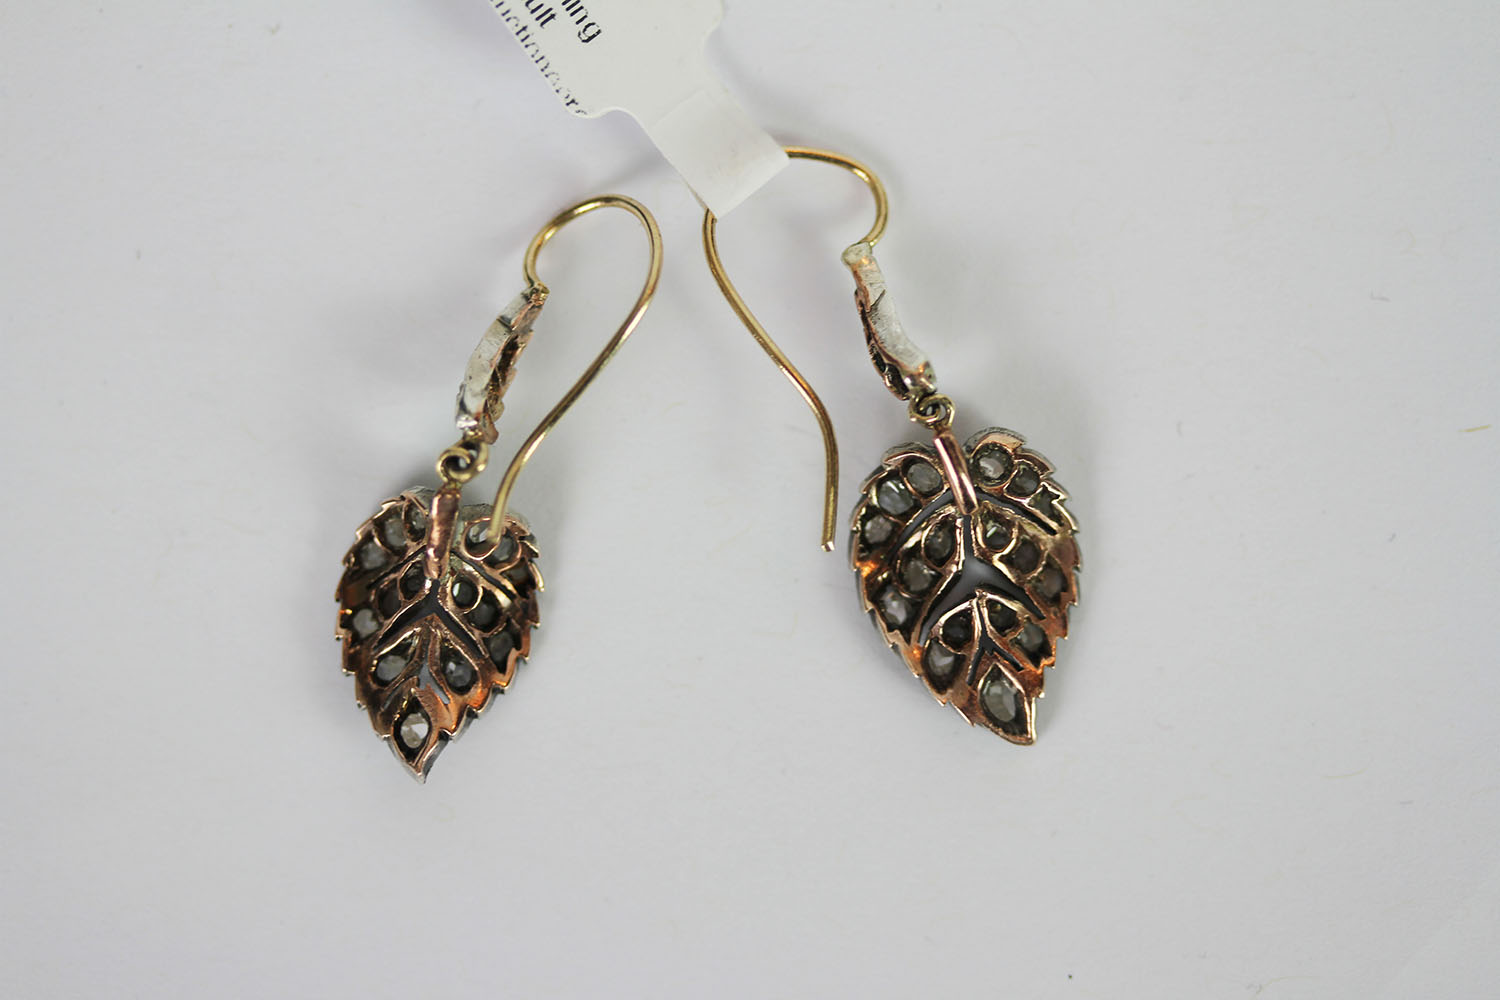 Victorian rose cut diamond leaf earrings, rose cut diamond leaves suspended from French wires, - Image 2 of 2